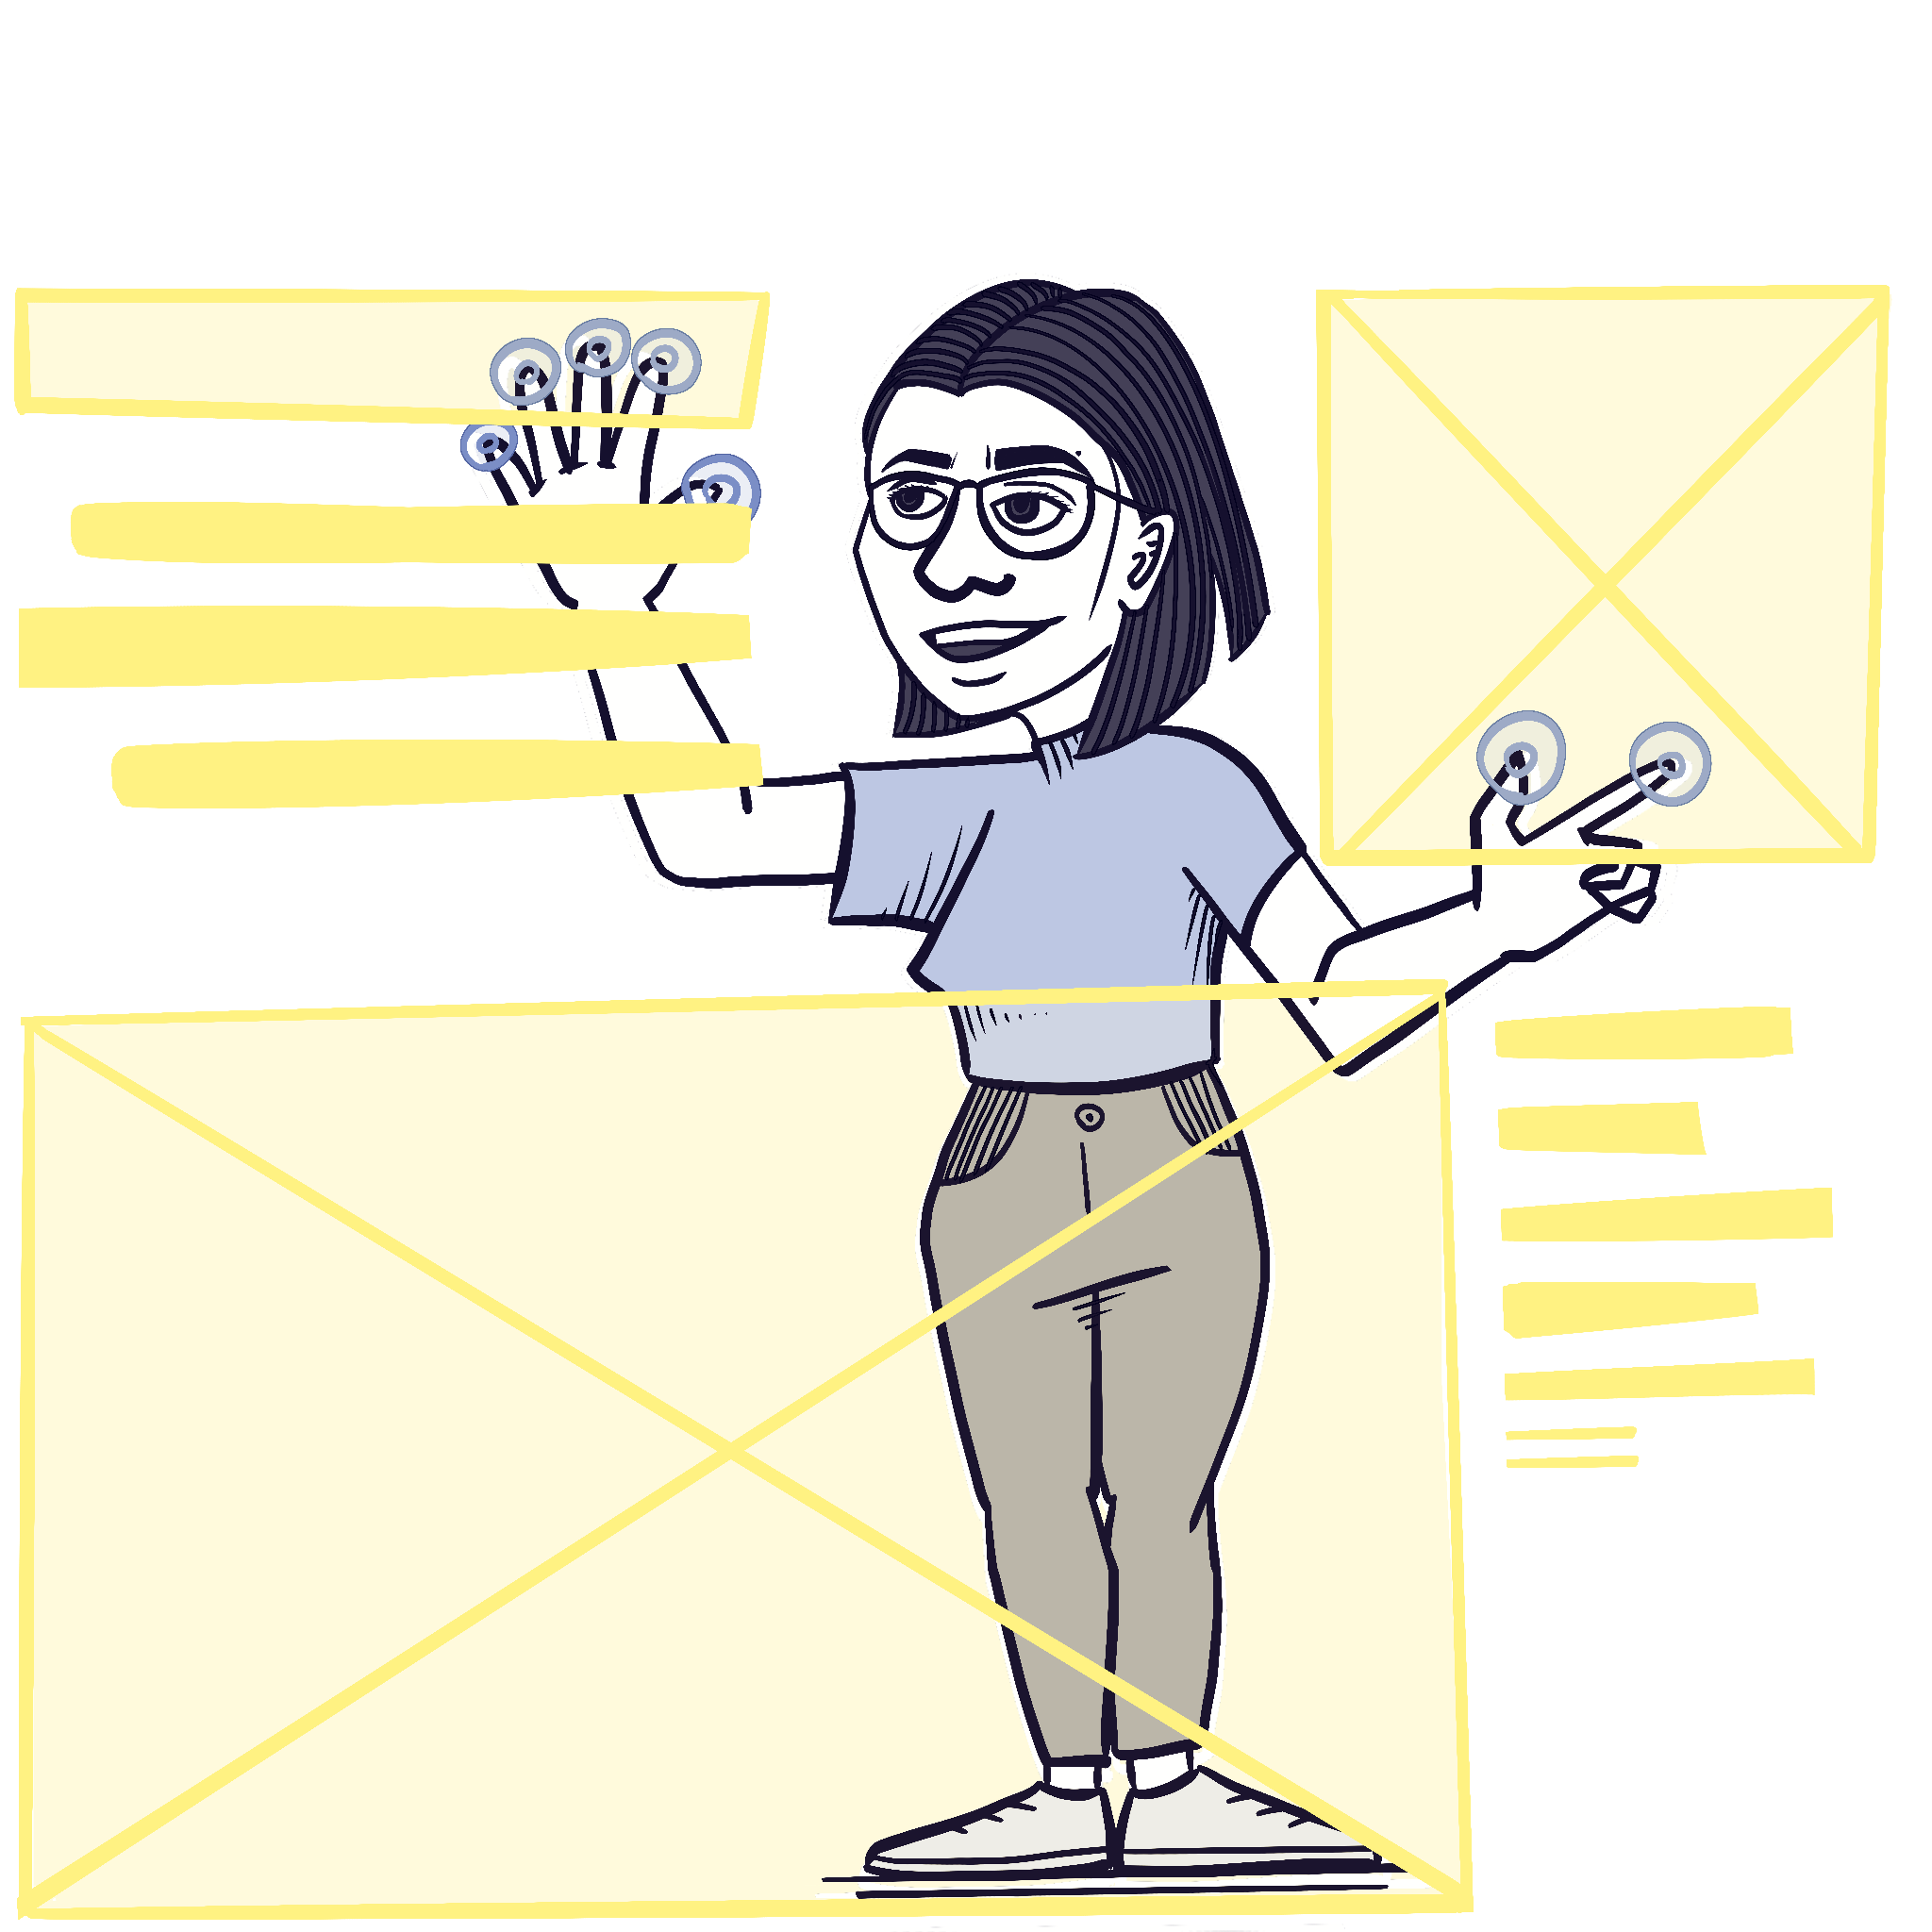 Illustration of a woman adjusting layout and typo.